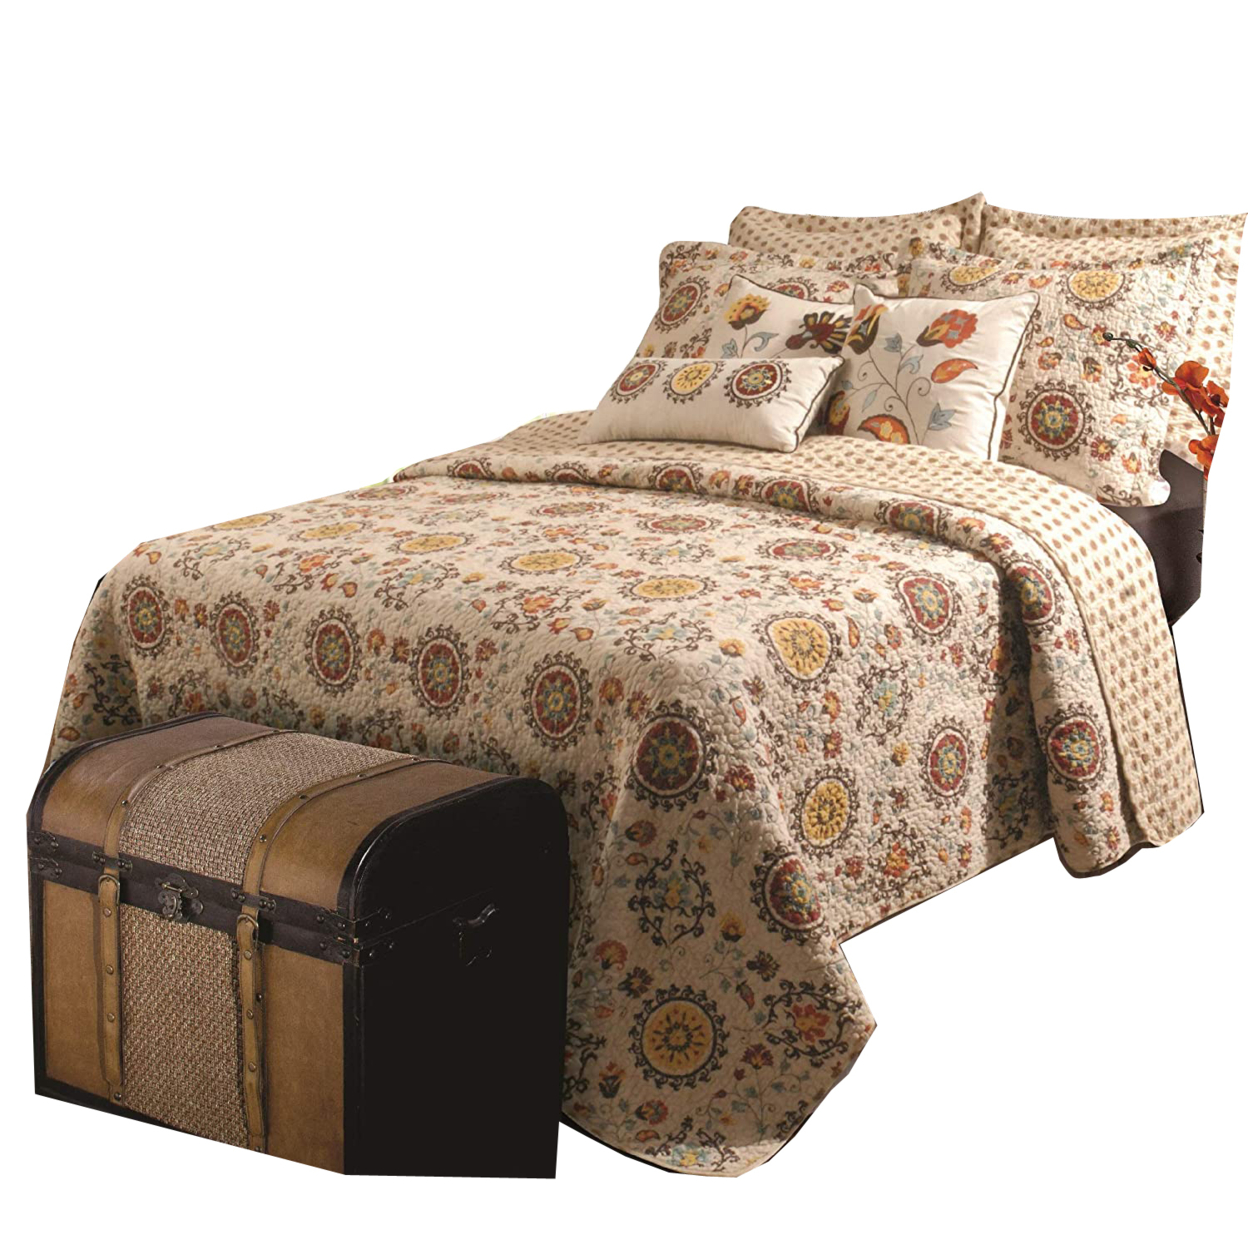 Elbe 4 Piece Twin Quilt Set With Medallion And Floral Pattern, Beige And Brown- Saltoro Sherpi